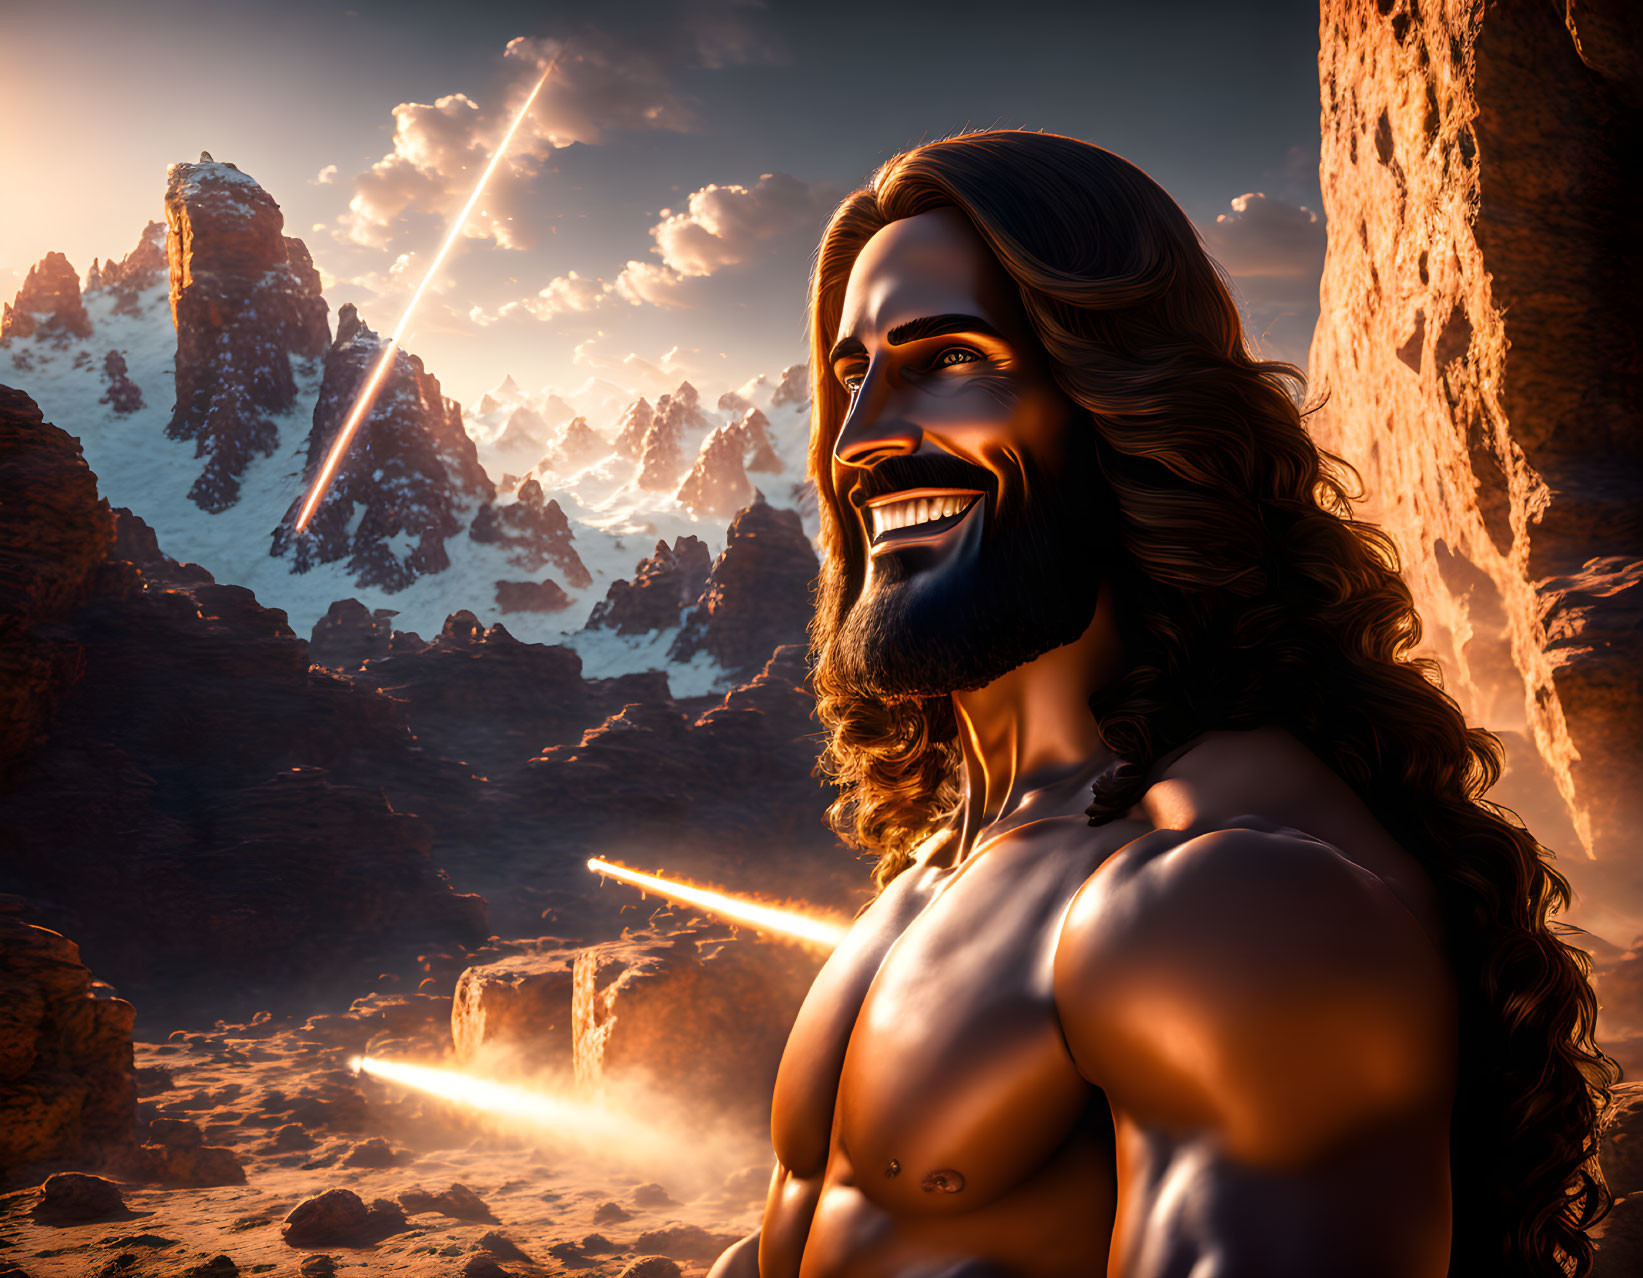 Muscular animated man with long hair and beard in canyon with two suns